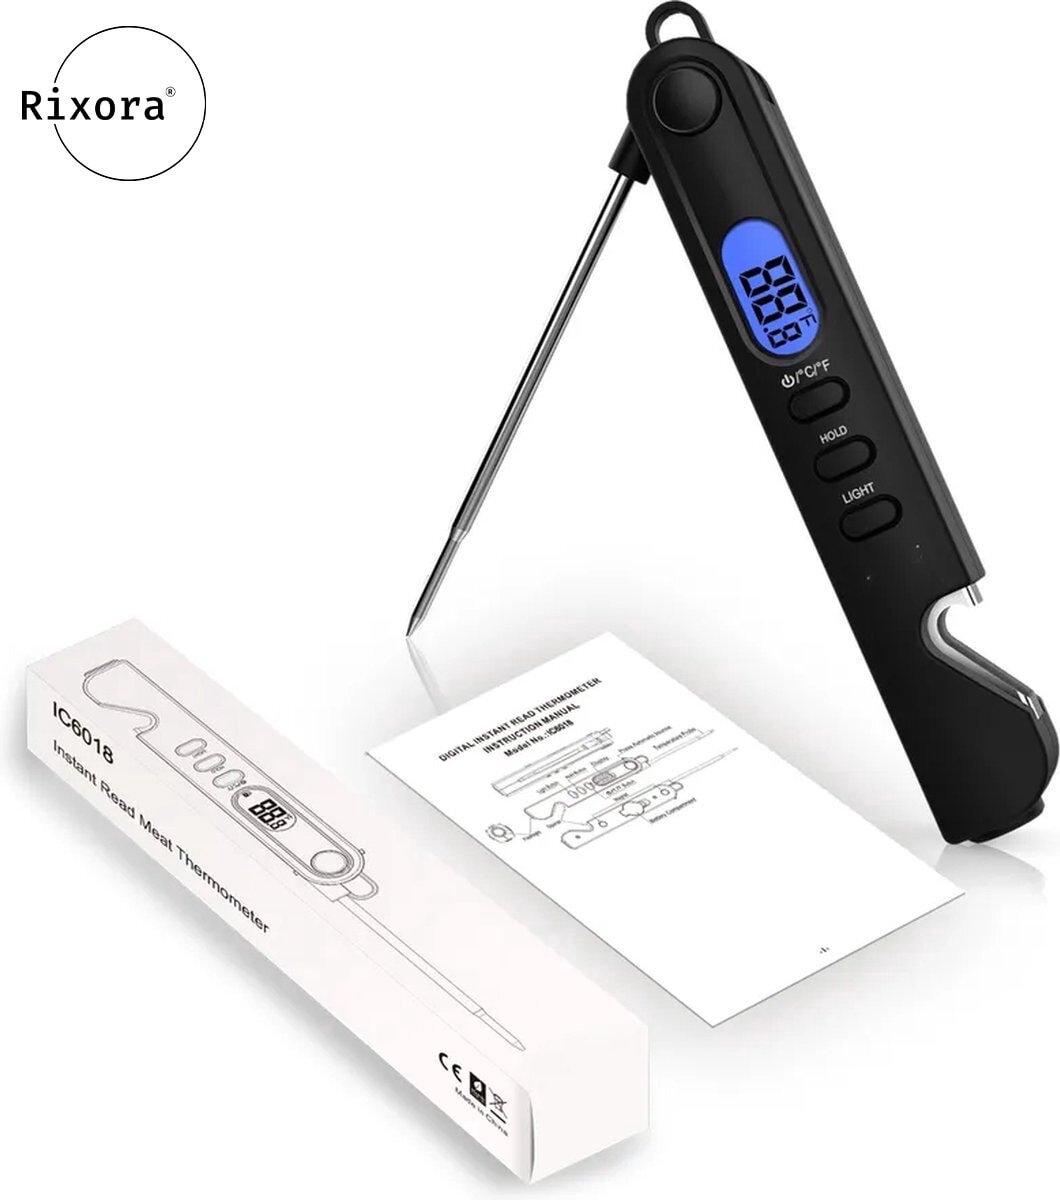 Rixora® - Vleesthermometer – BBQ Thermometer – Kernthermometer - Barbecue – Suikerthermometer – Digitaal – Keukenthermometer – Kerntemperatuurmeter - Rixora